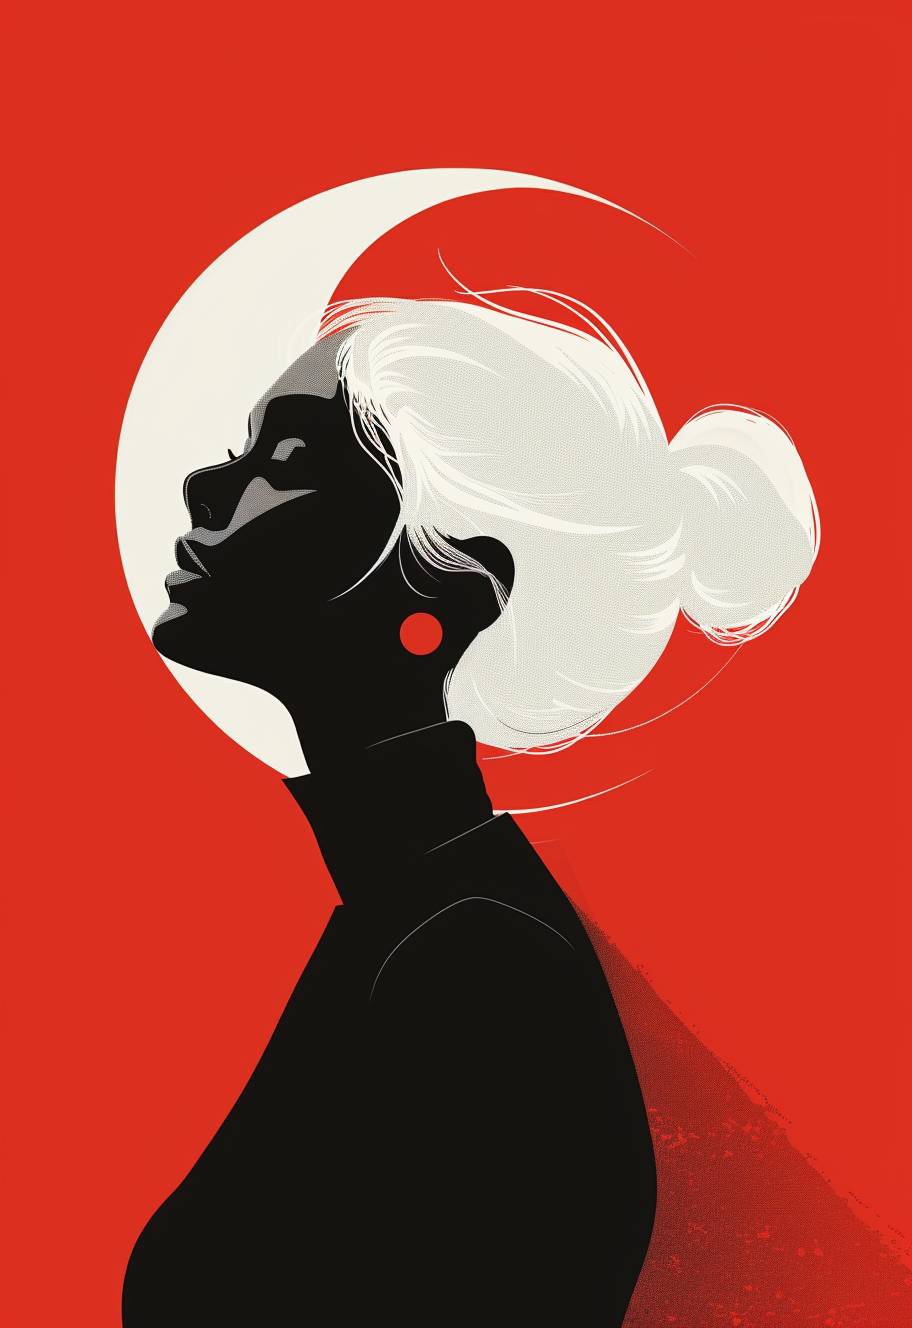 Minimalist retro illustration in the style of surreal women with white hair, black and white color palette against a red background with dark contrast, minimalism featuring simple shapes in a surreal style.